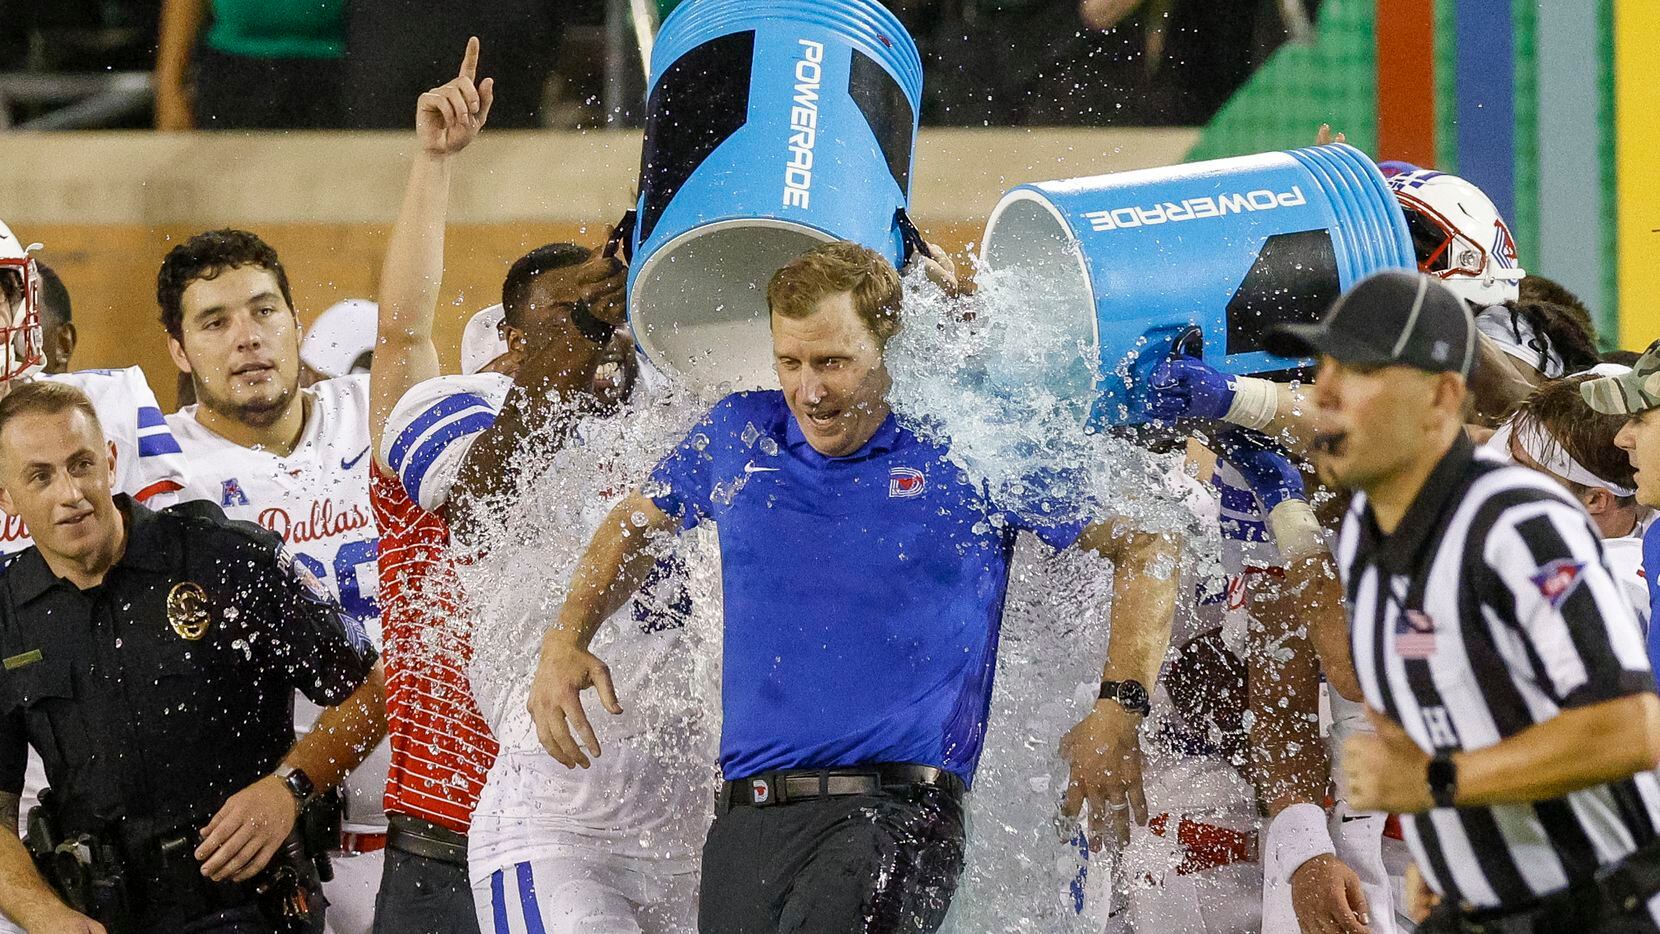 SMU head coach Rhett Lashlee is doused with ice water after a win against UNT at Apogee...